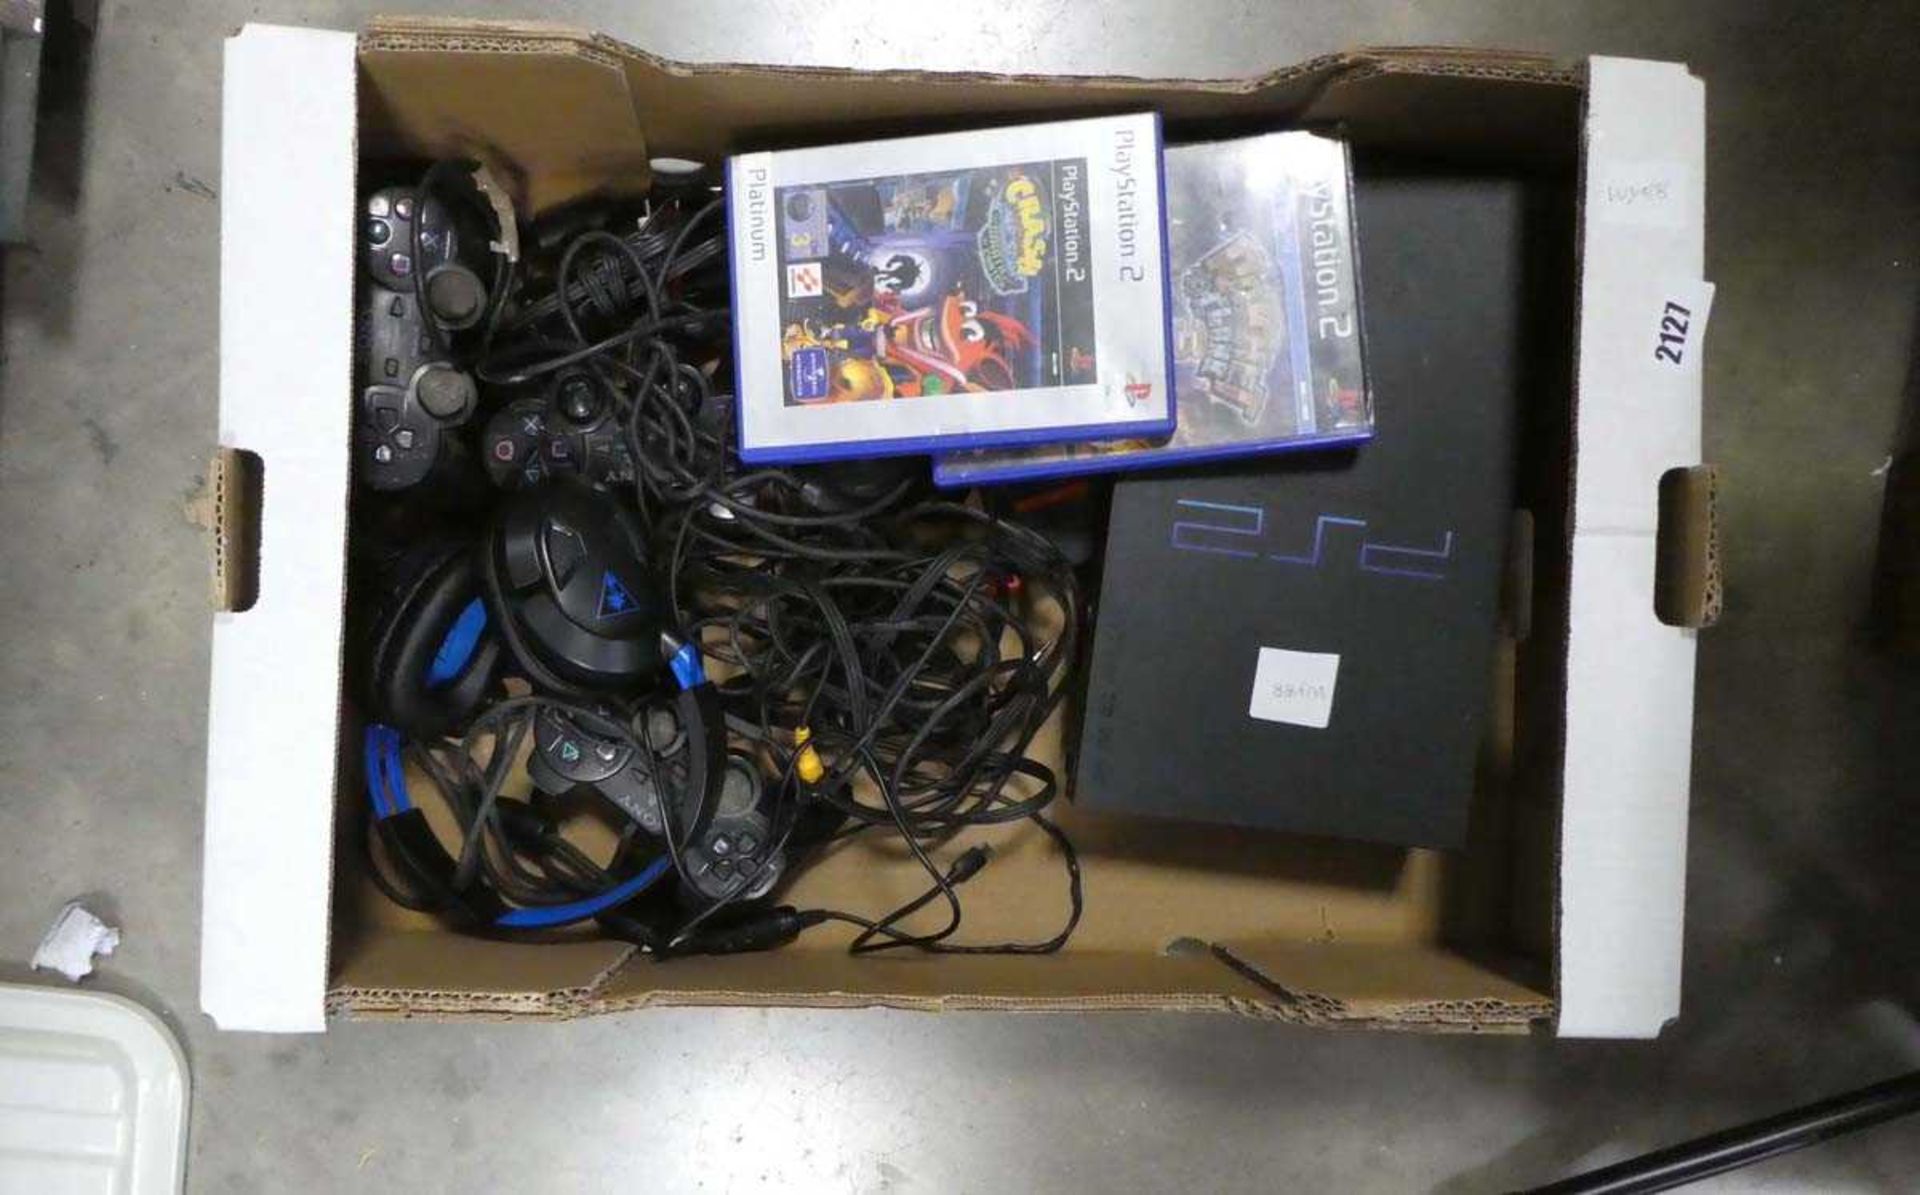 Sony PlayStation 2 console with various accessories and some games